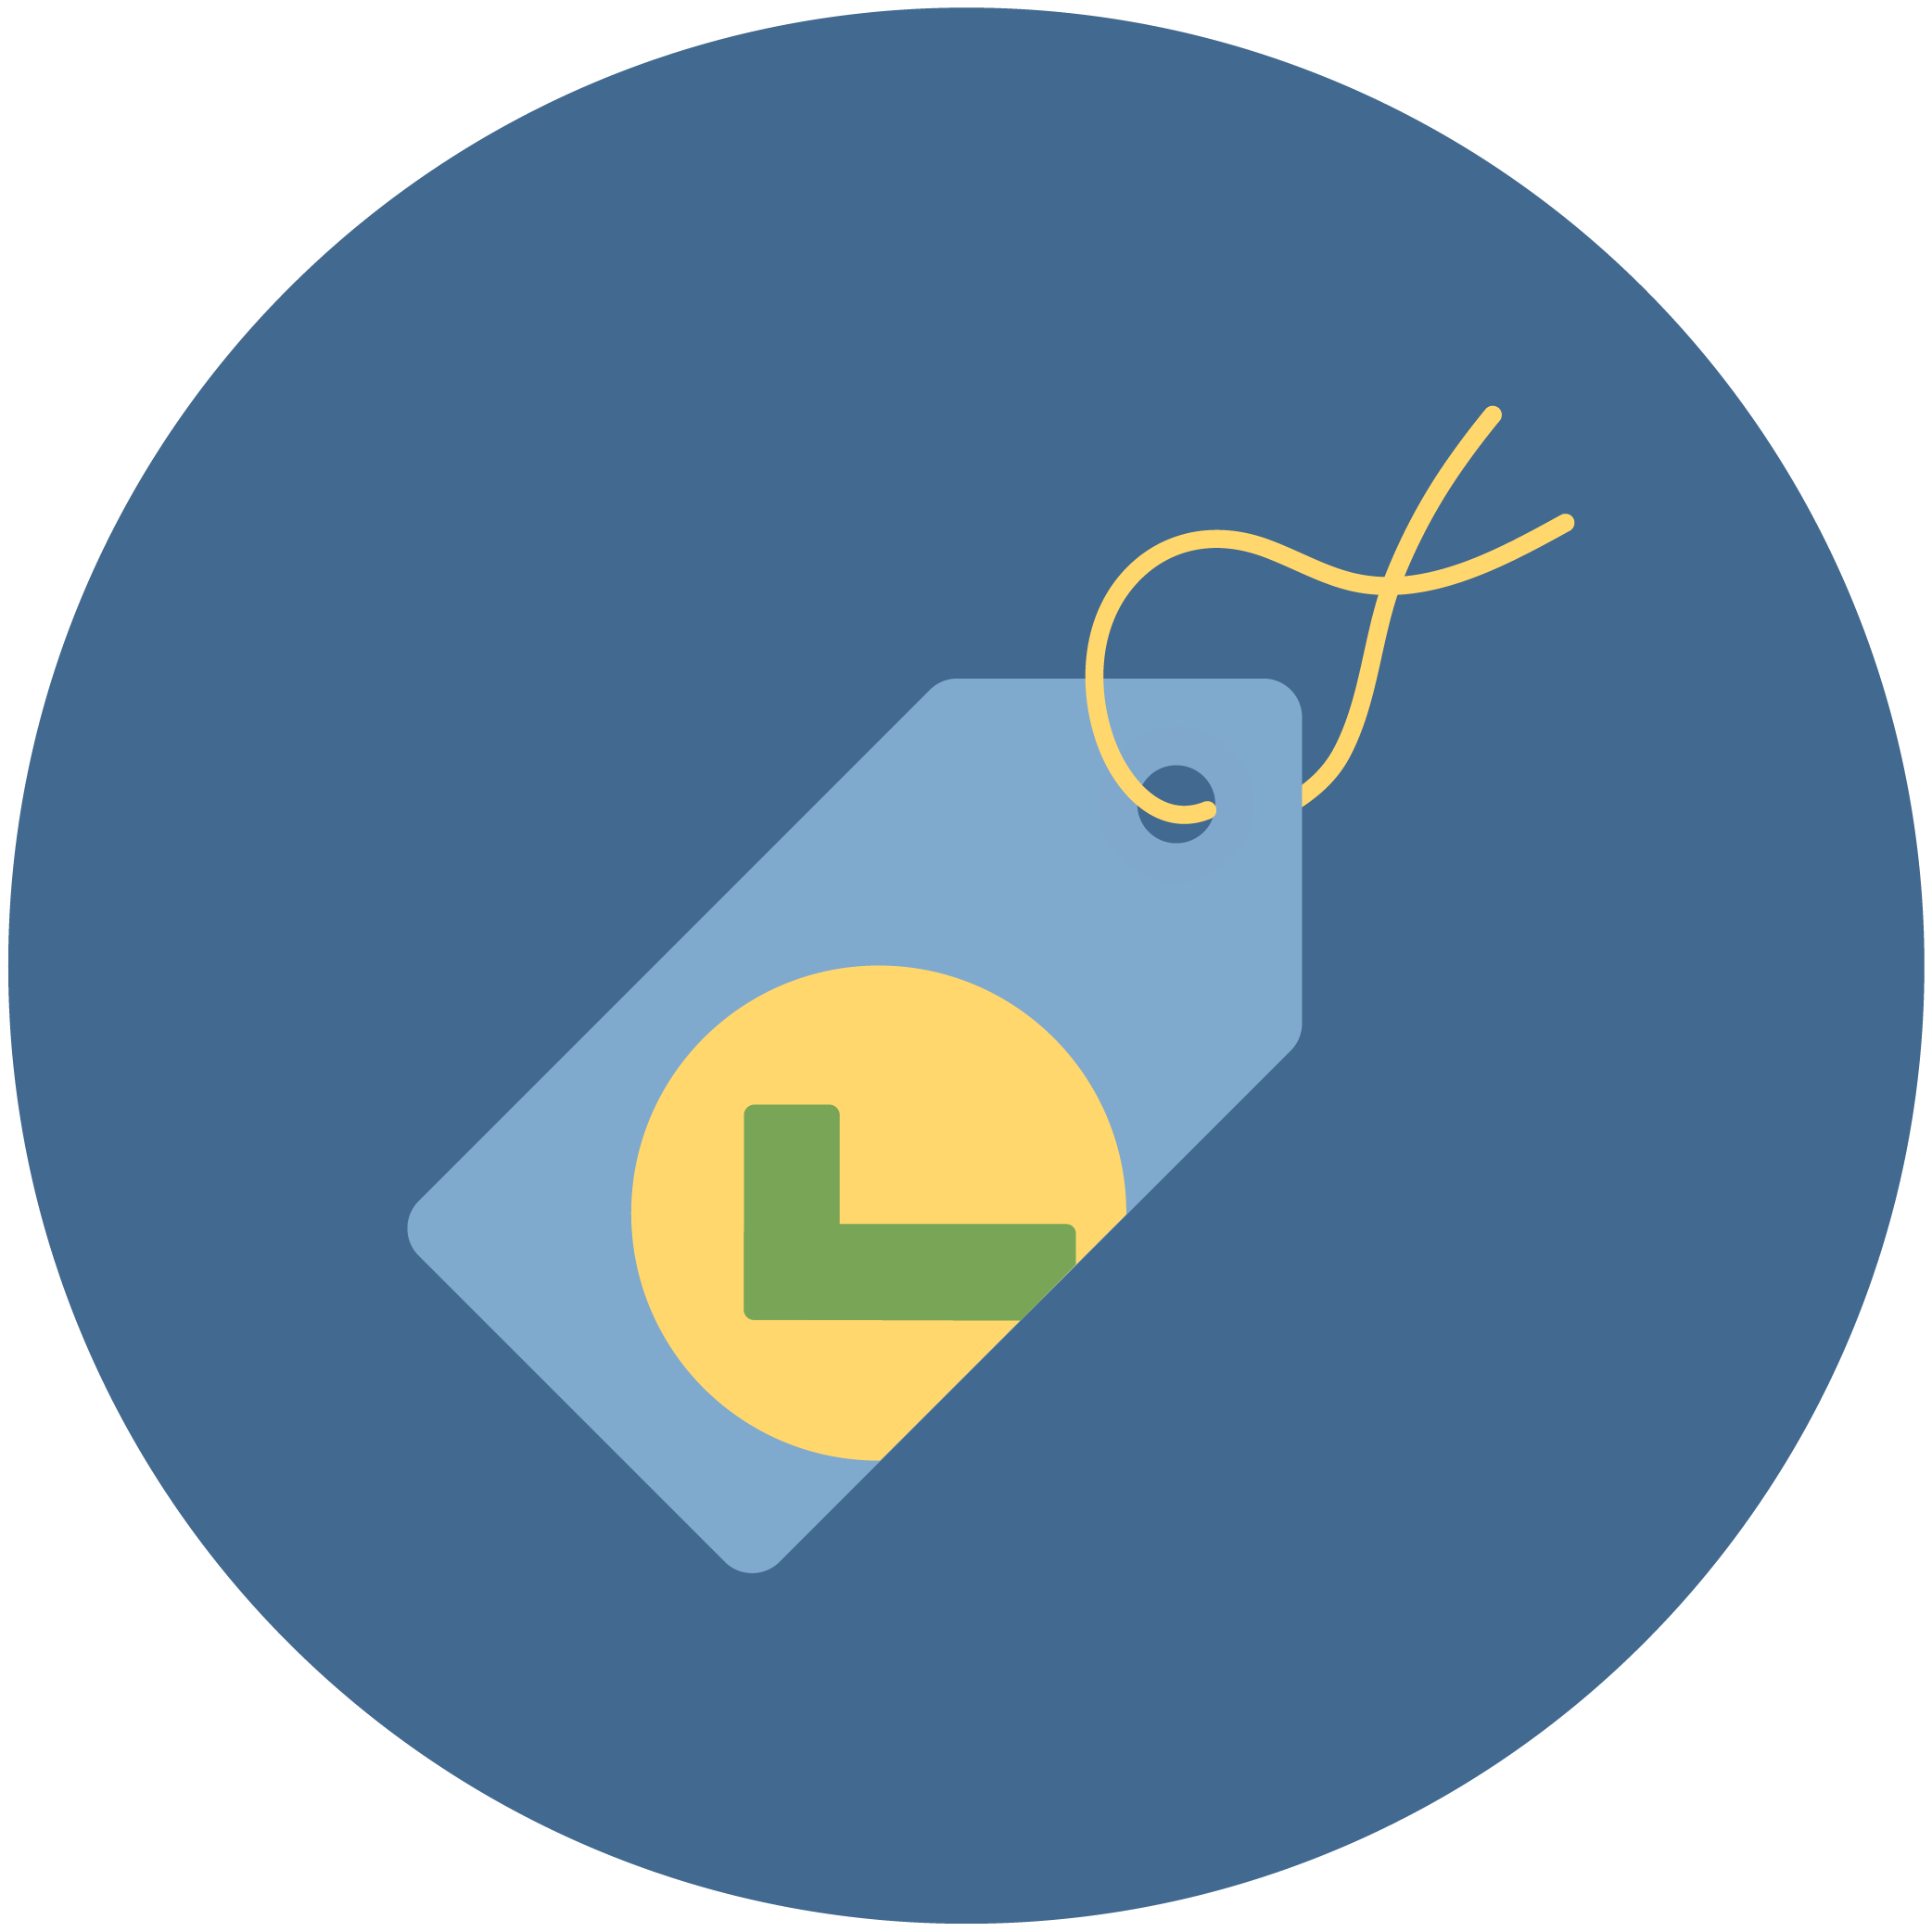 Product tag icon. Click to see a list of eligible products for the program.